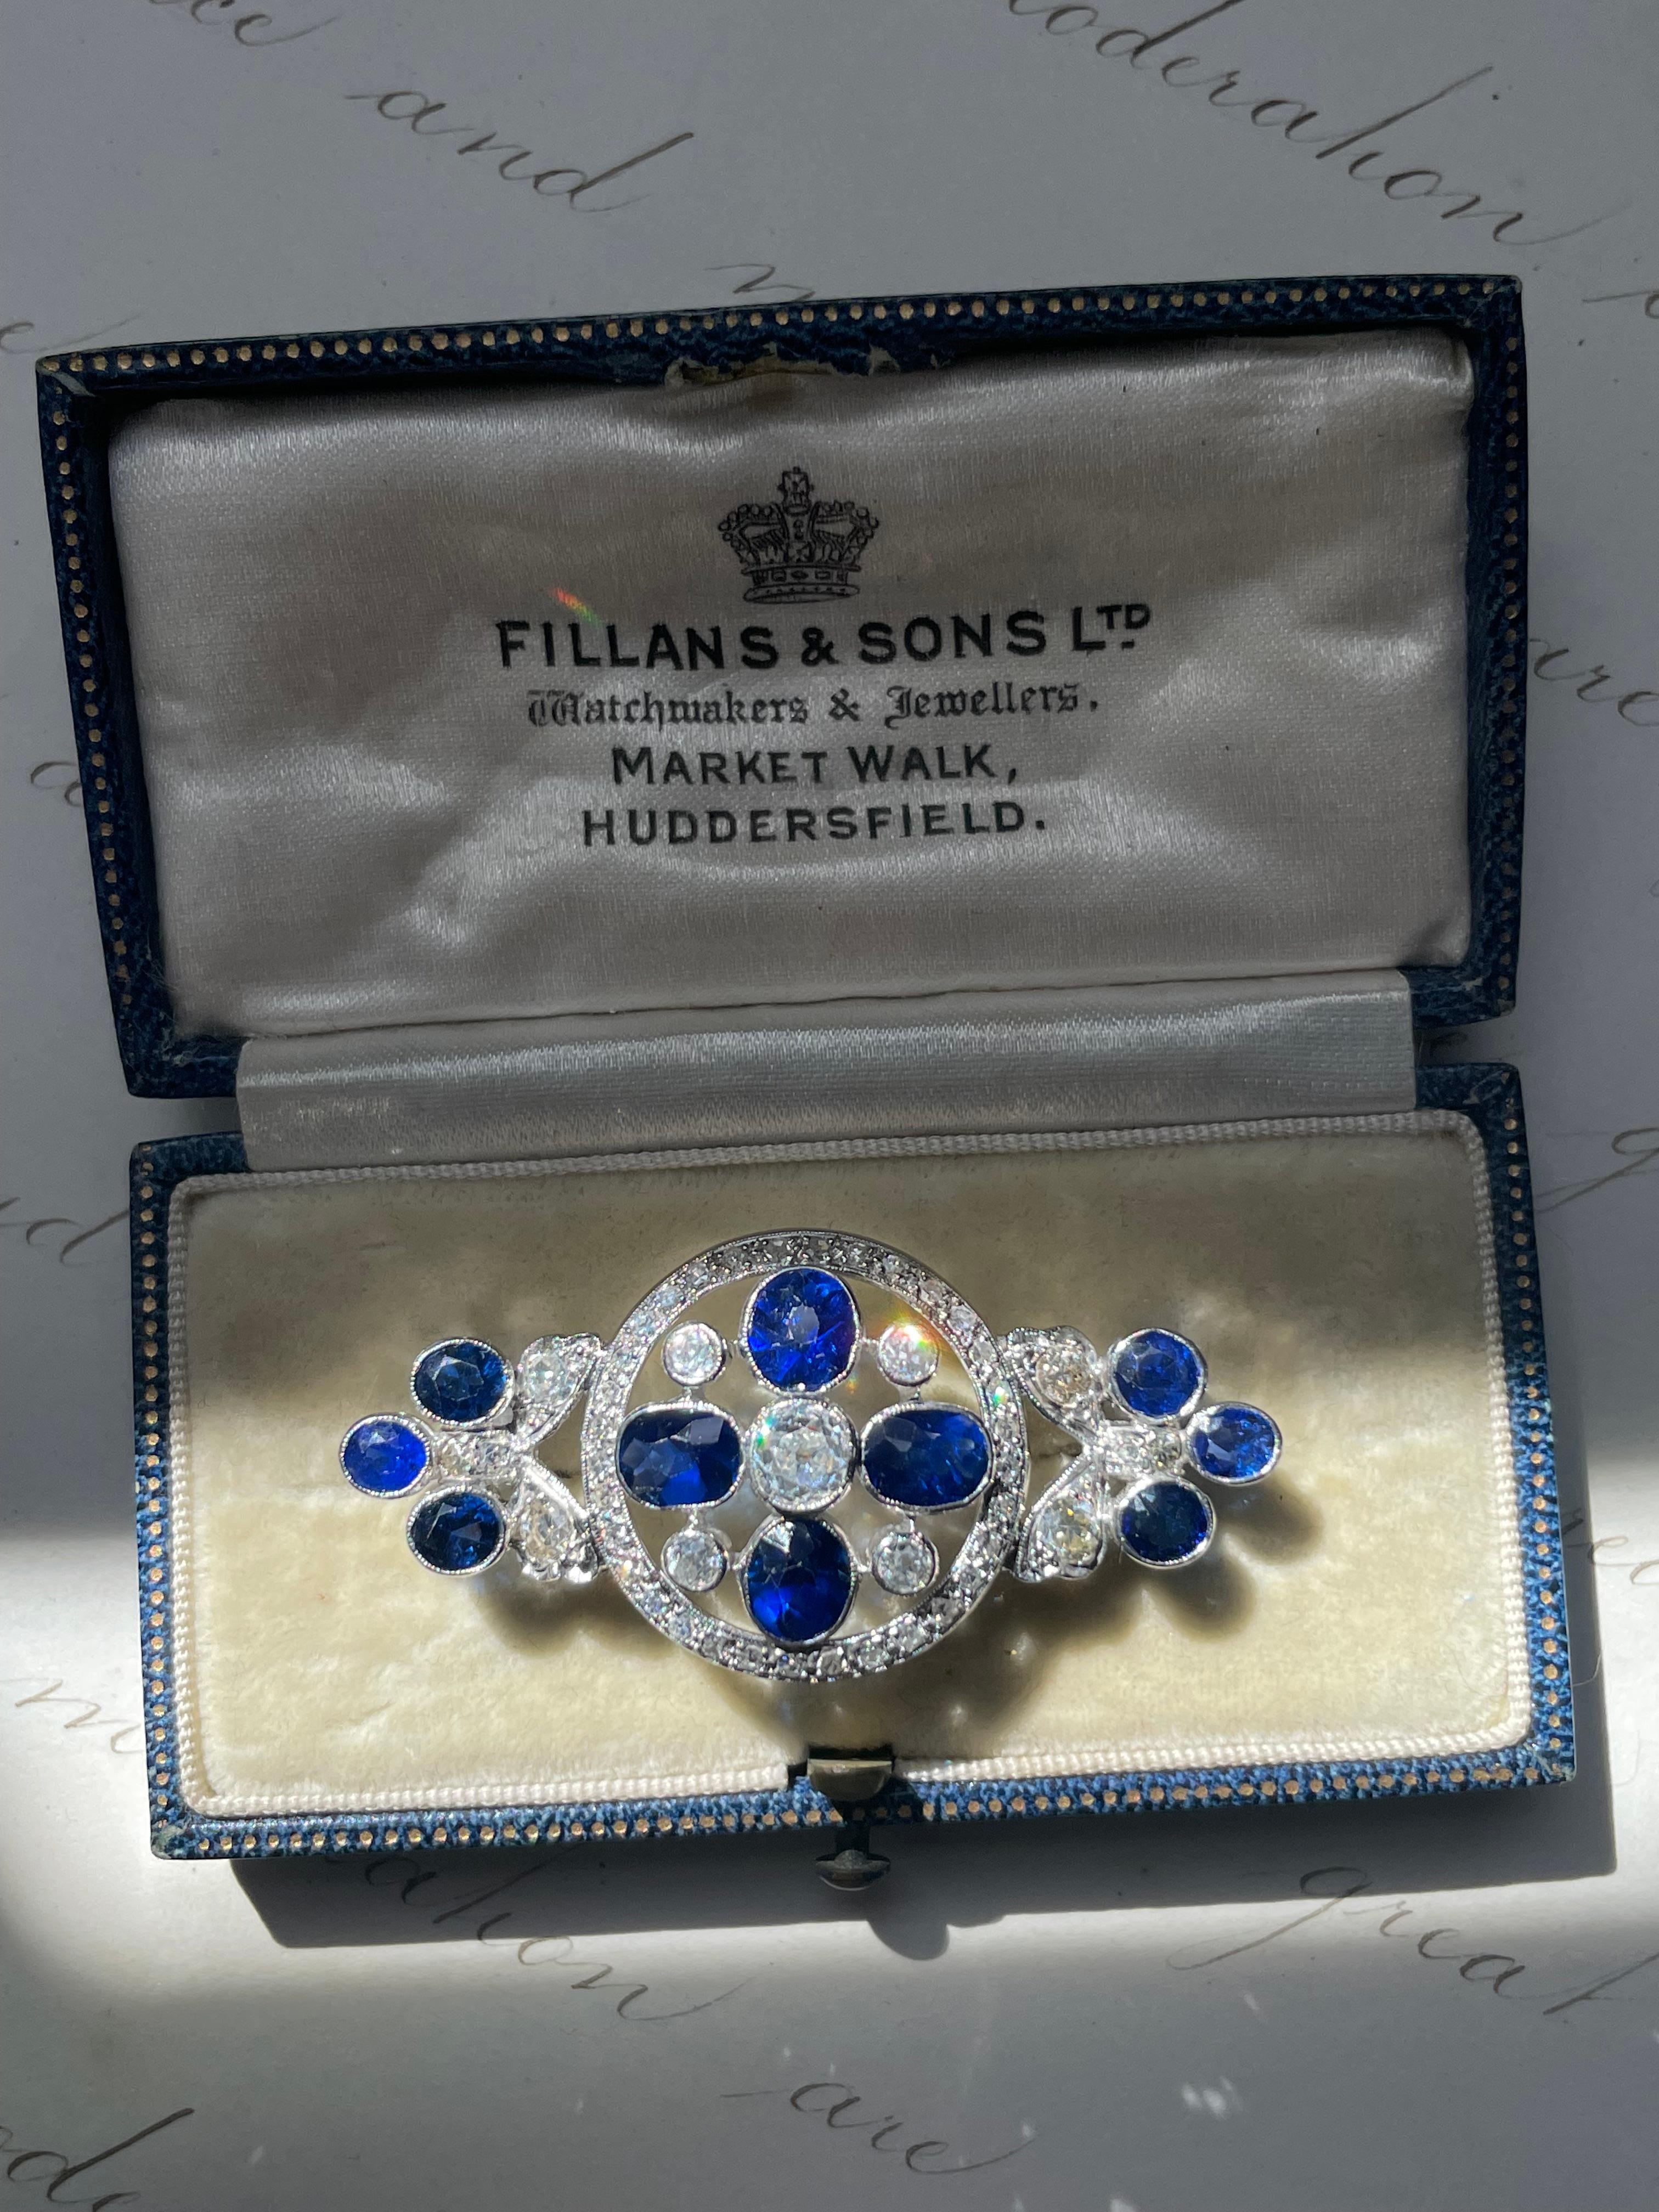 The center of this charming Edwardian / Art Deco brooch is like a tiny flower with petals of natural vivid blue sapphires and shimmering old mine-cut diamonds, floating within a frame lined with glittering single-cut diamonds, finished with sapphire